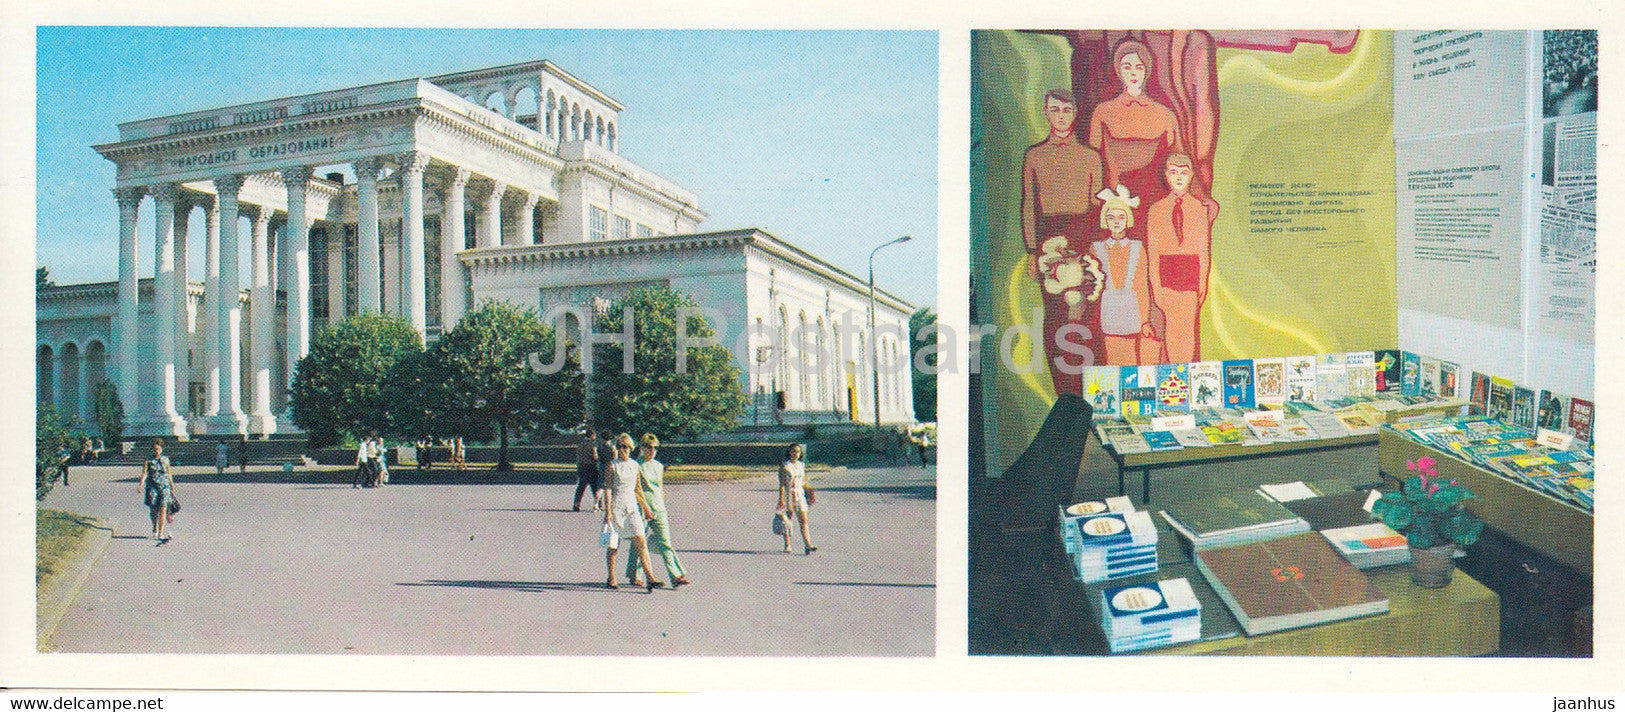 The Public Education pavilion - Books for Primary School - VDNKh - 1975 - Russia USSR - unused - JH Postcards